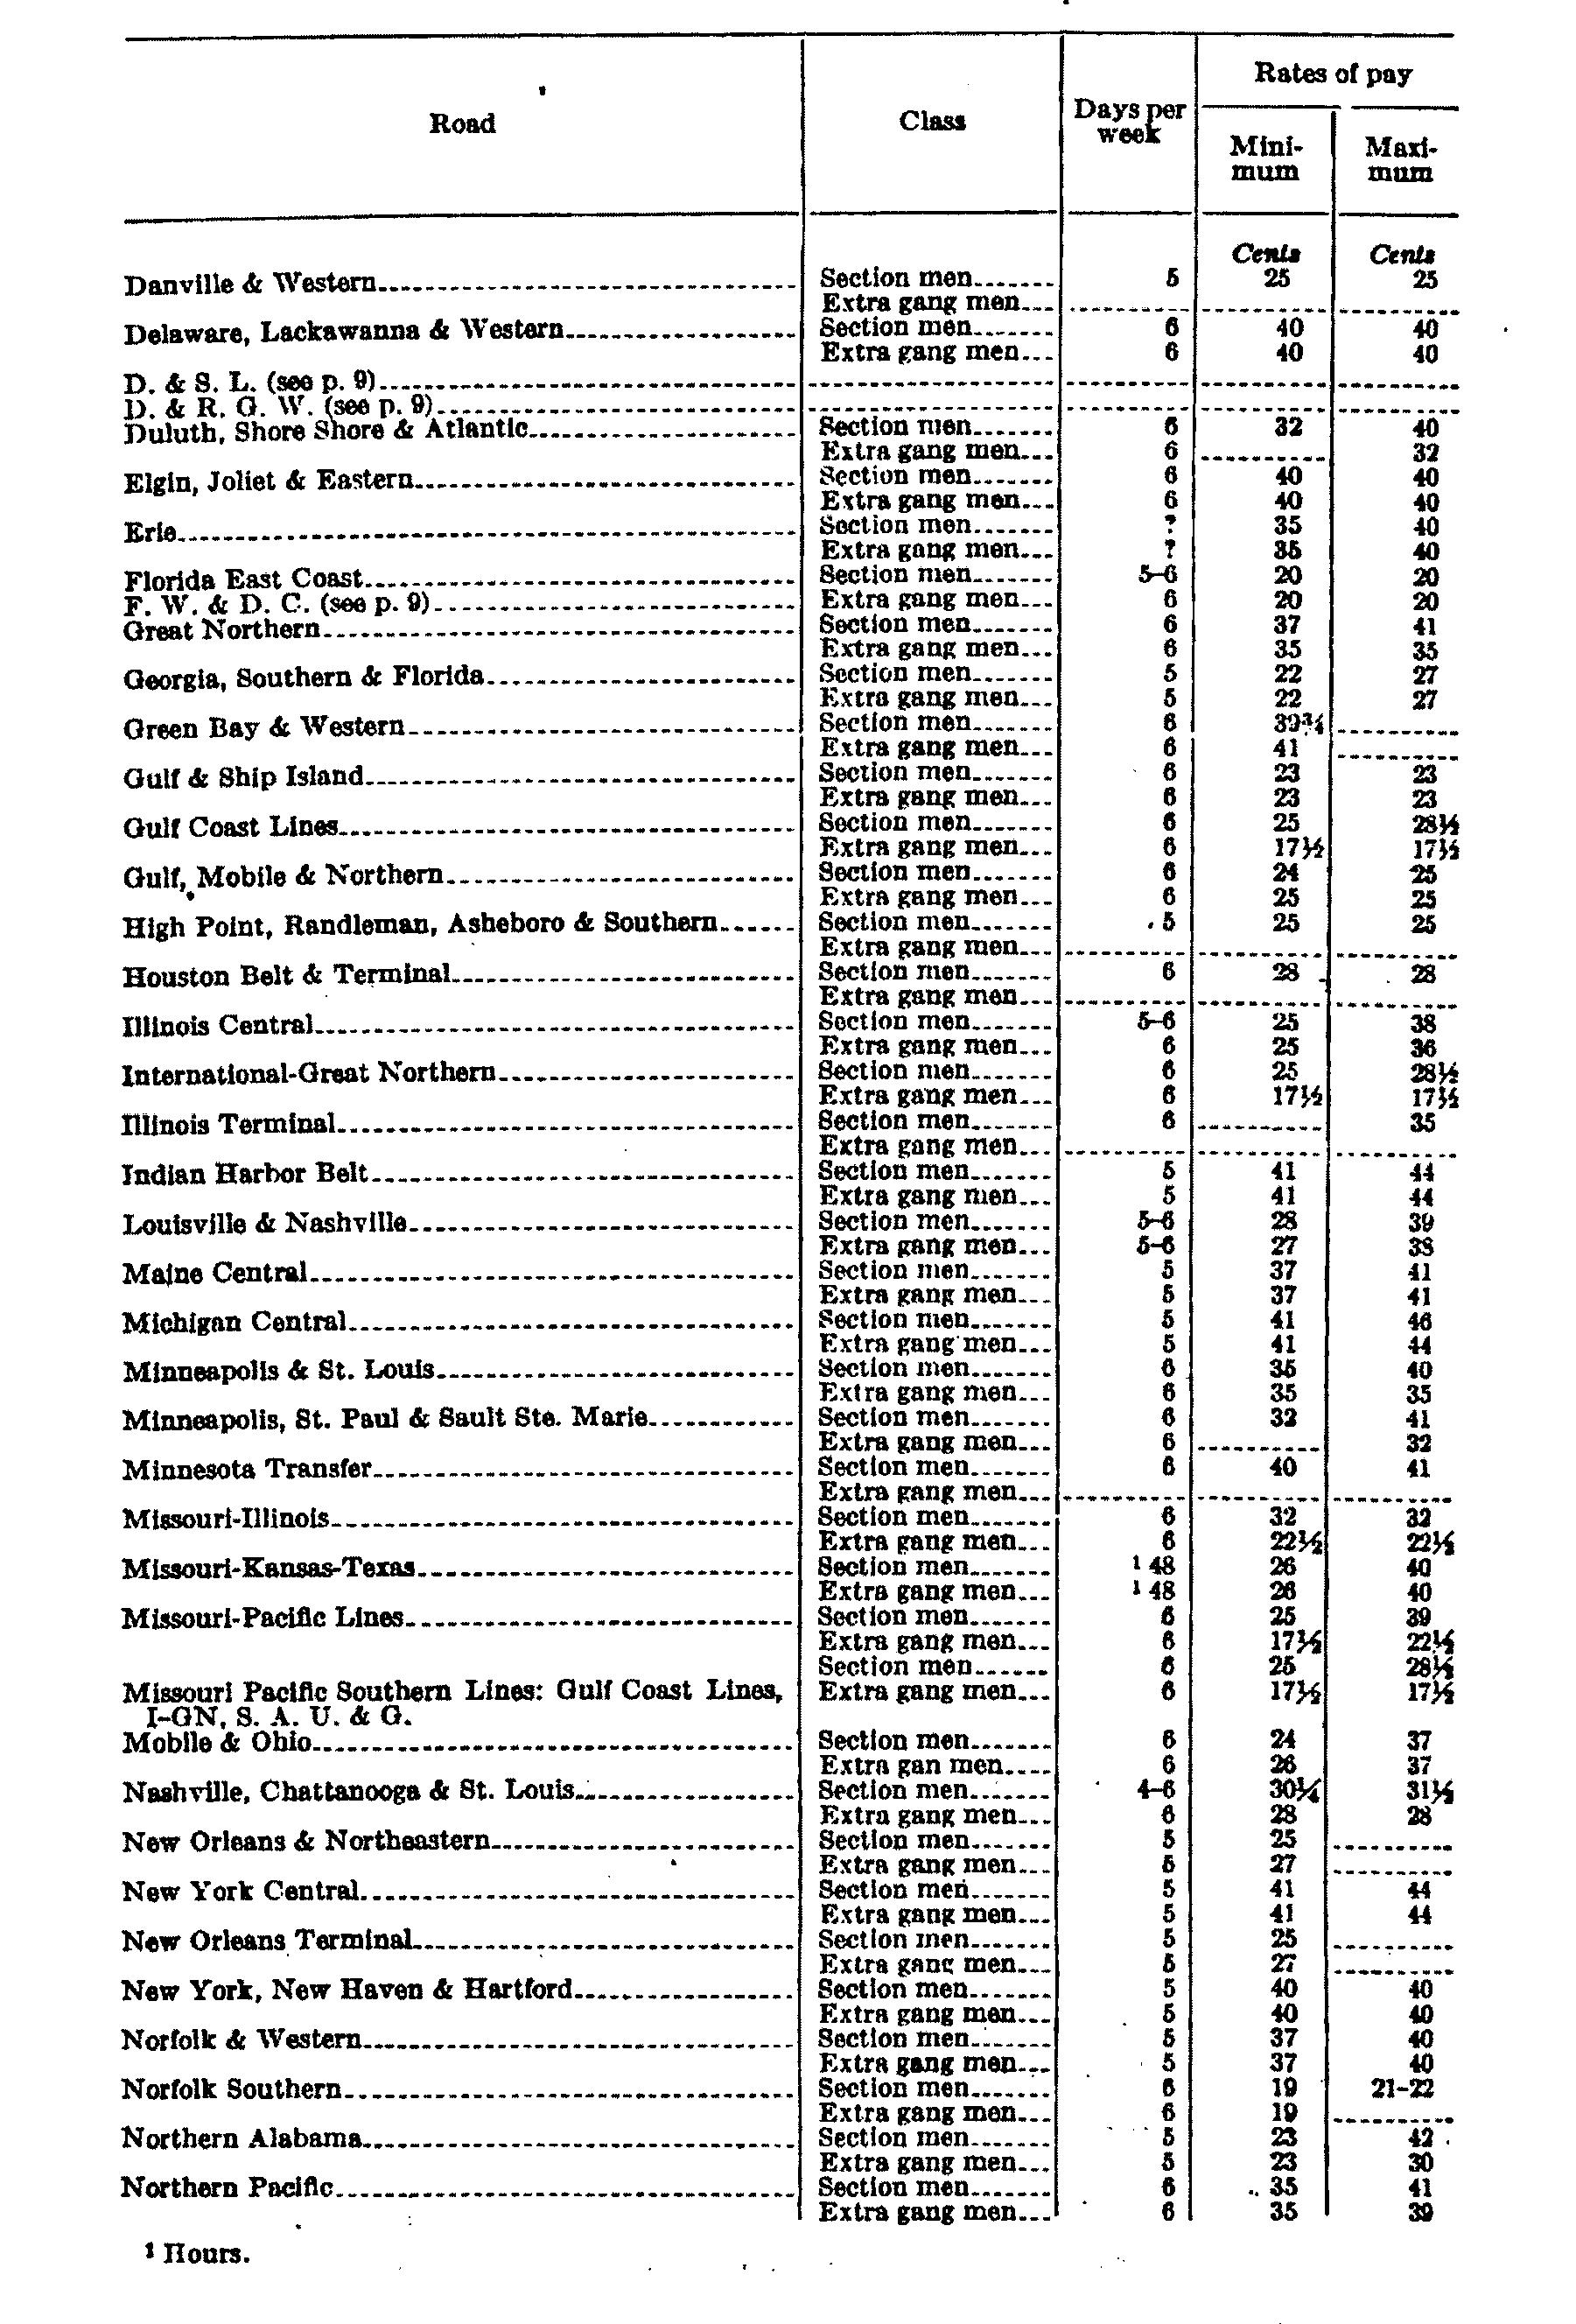 Page 1152 Railroad Wages